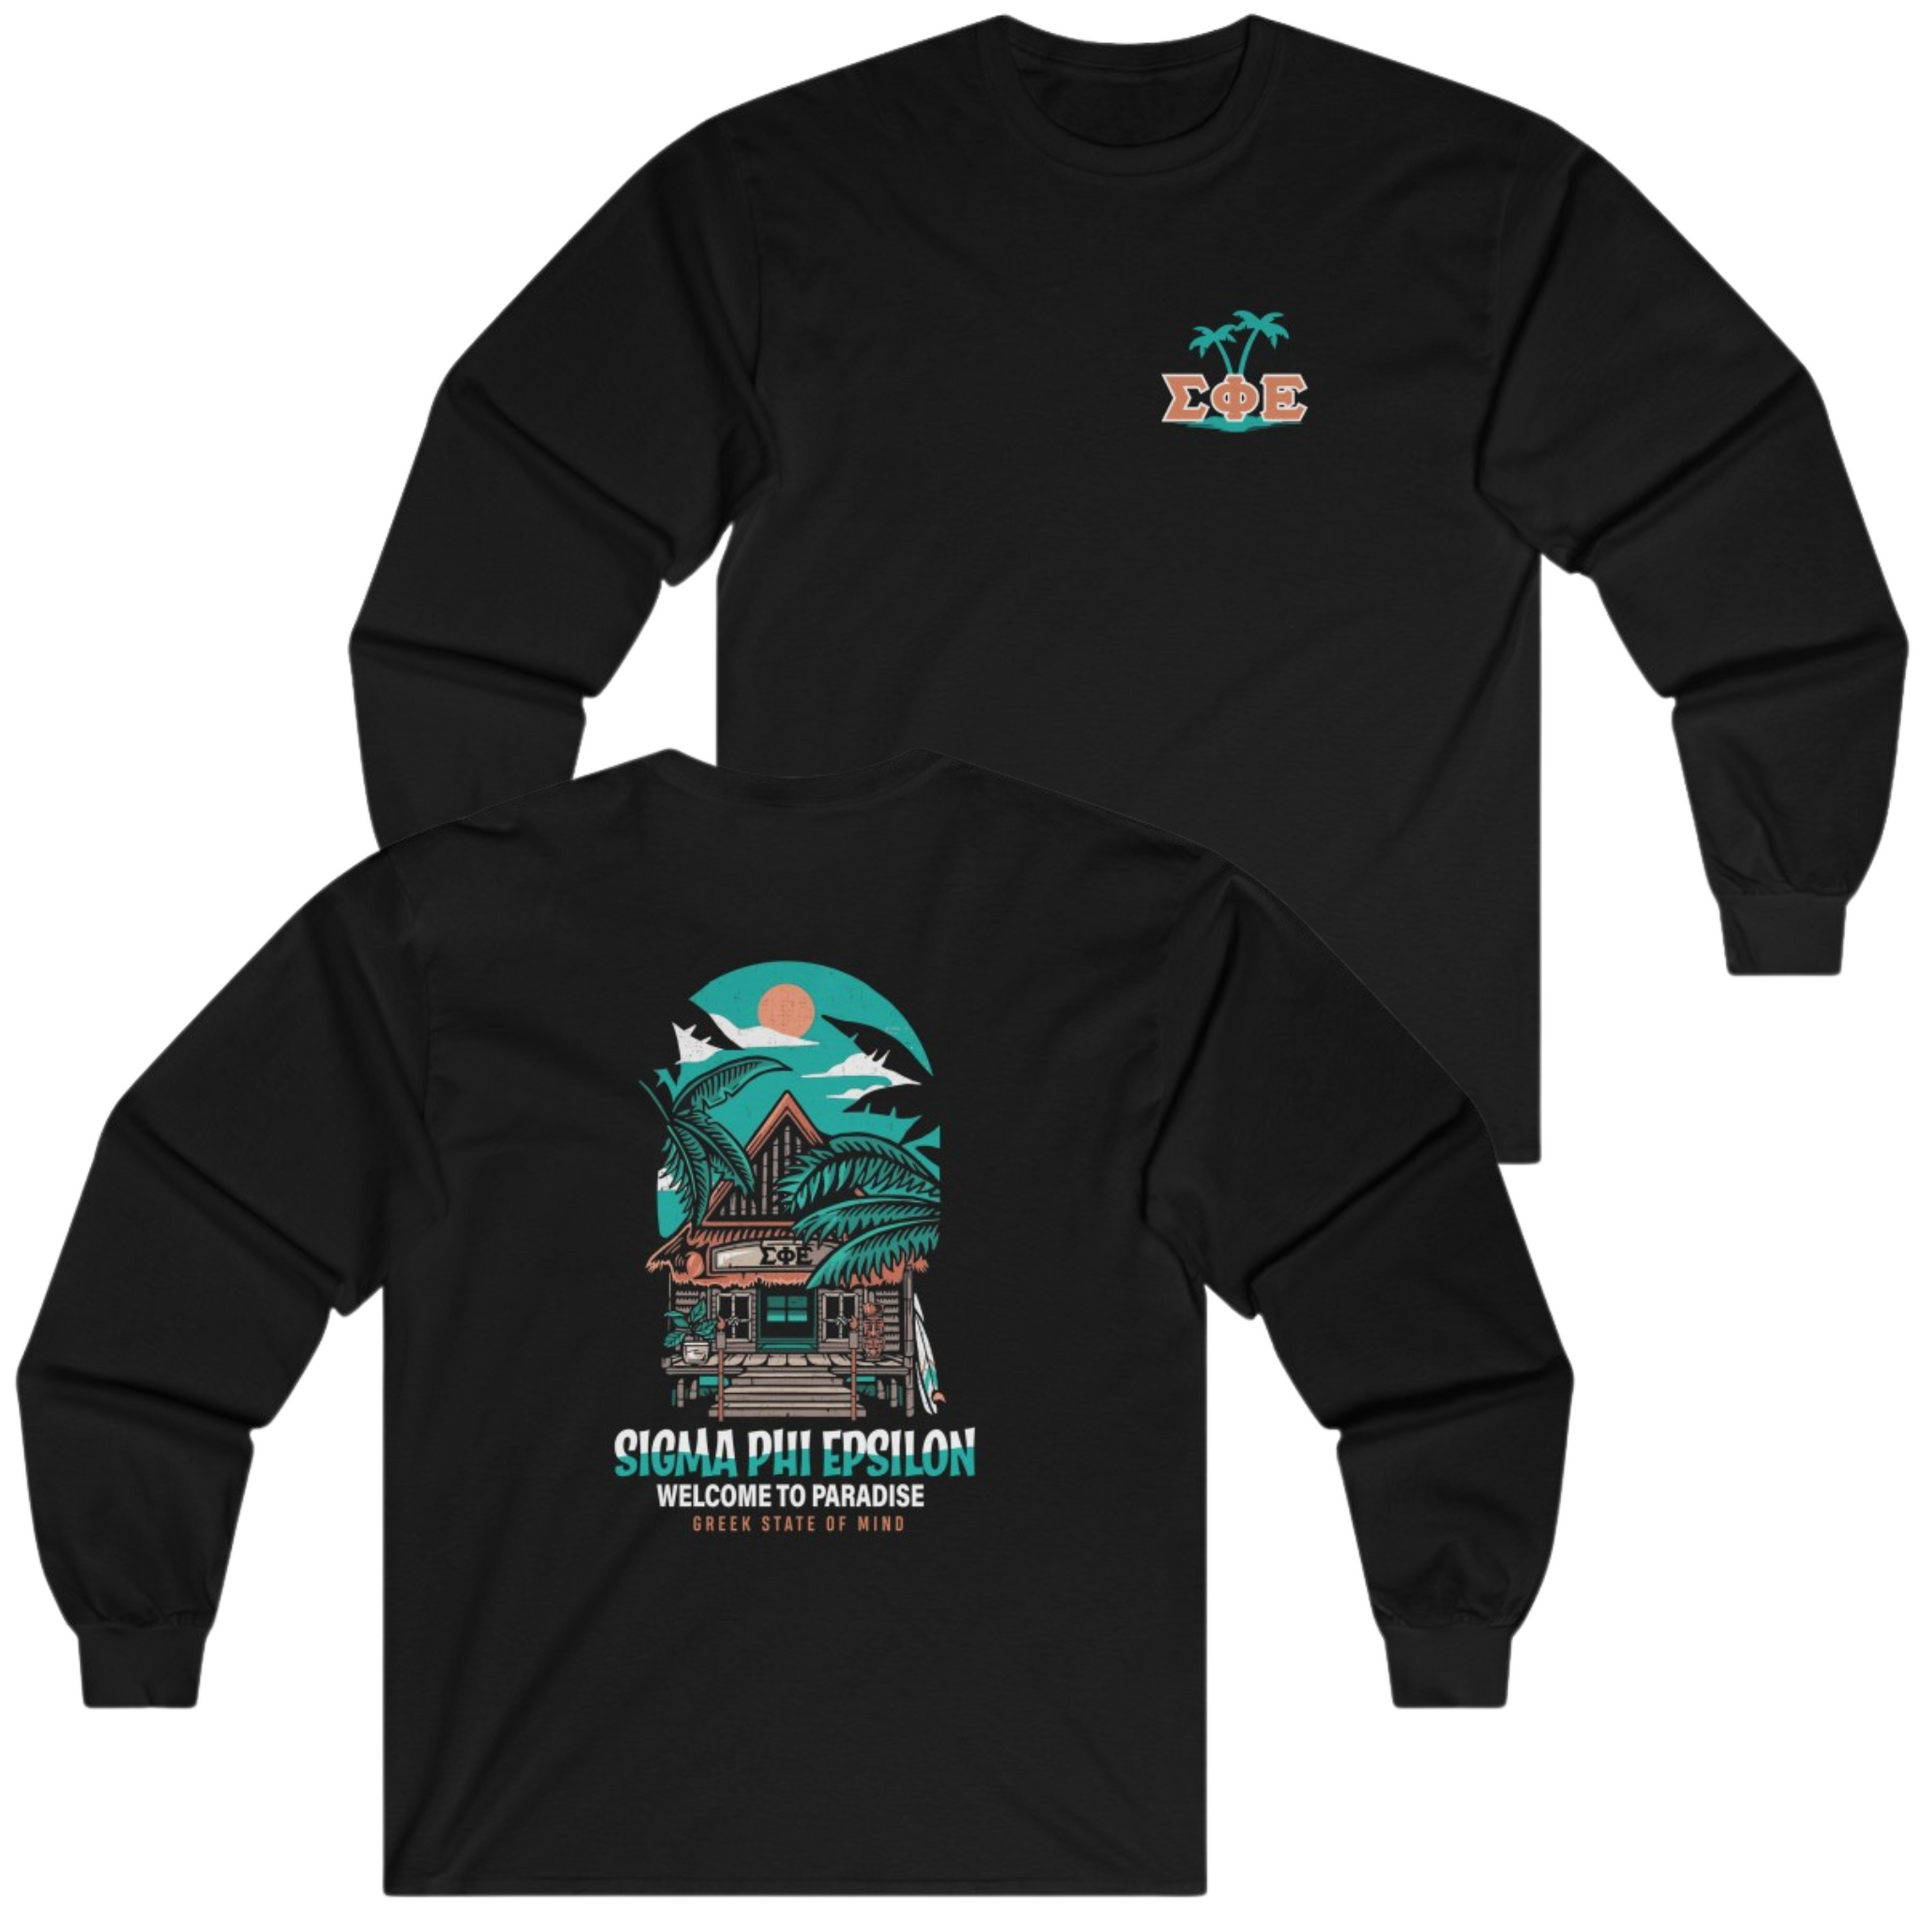 Black Sigma Phi Epsilon Graphic Long Sleeve T-Shirt | Welcome to Paradise | SigEp Fraternity Clothes and Merchandise